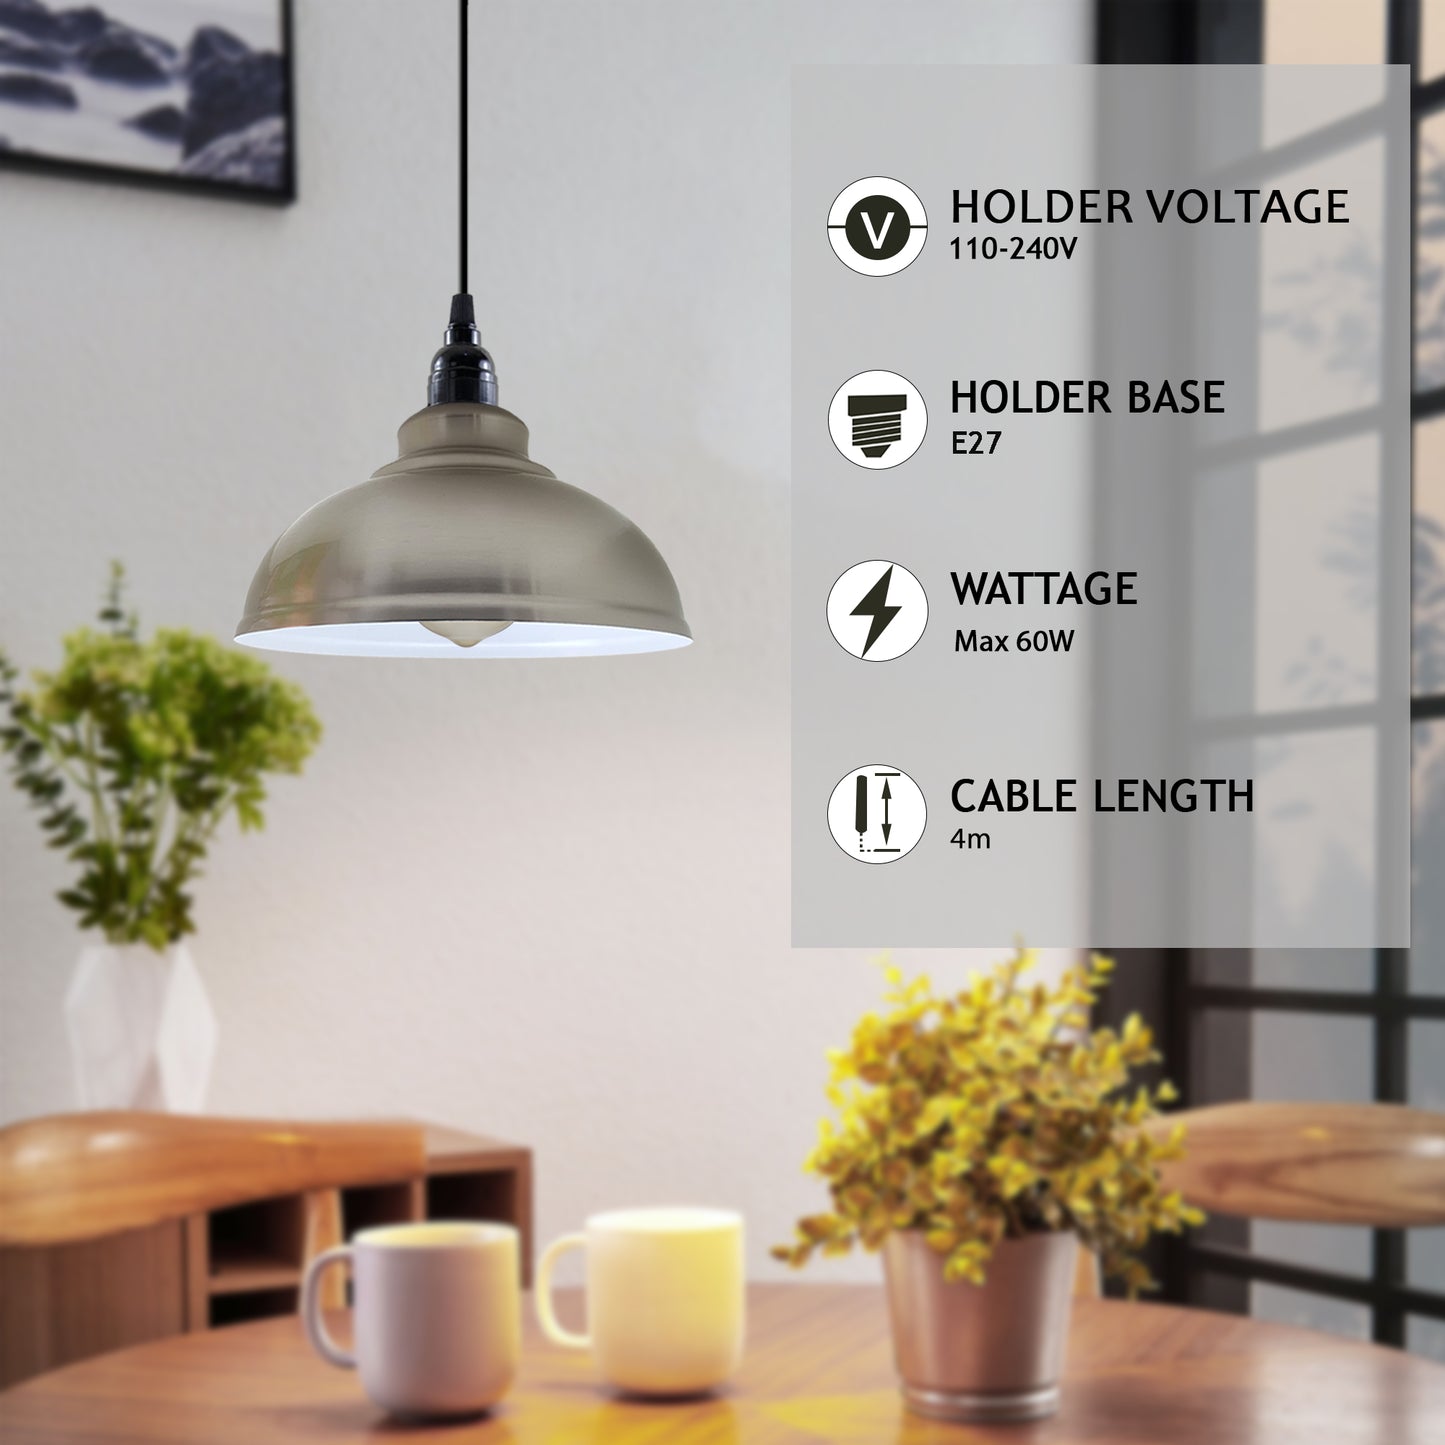 Adjustable Plug-in Pendant light with Dimmer Switch for dining room.JPG